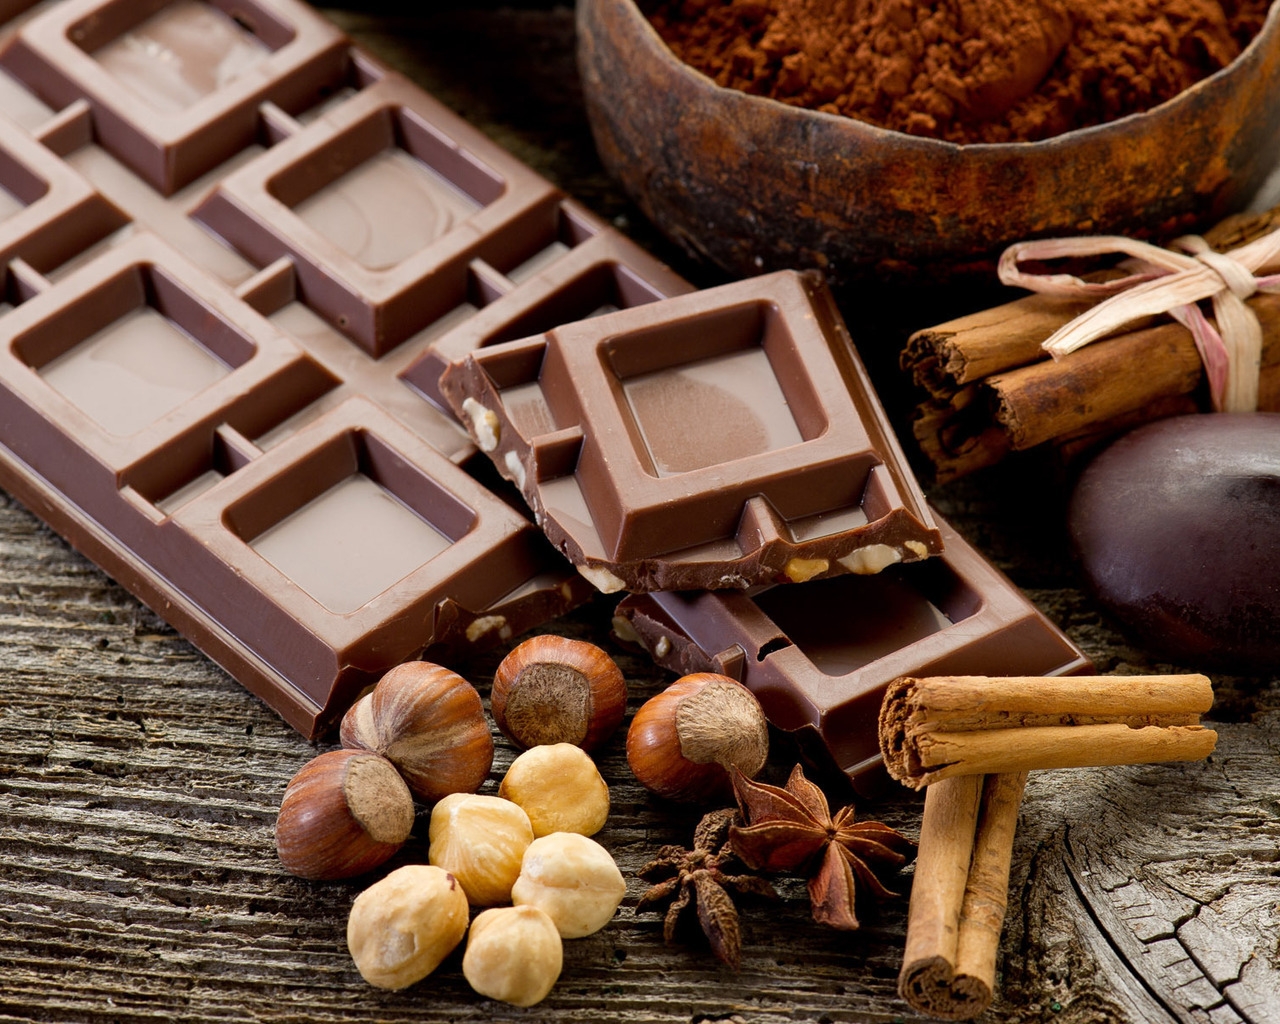 Chocolate and Cinnamon and Nuts for 1280 x 1024 resolution